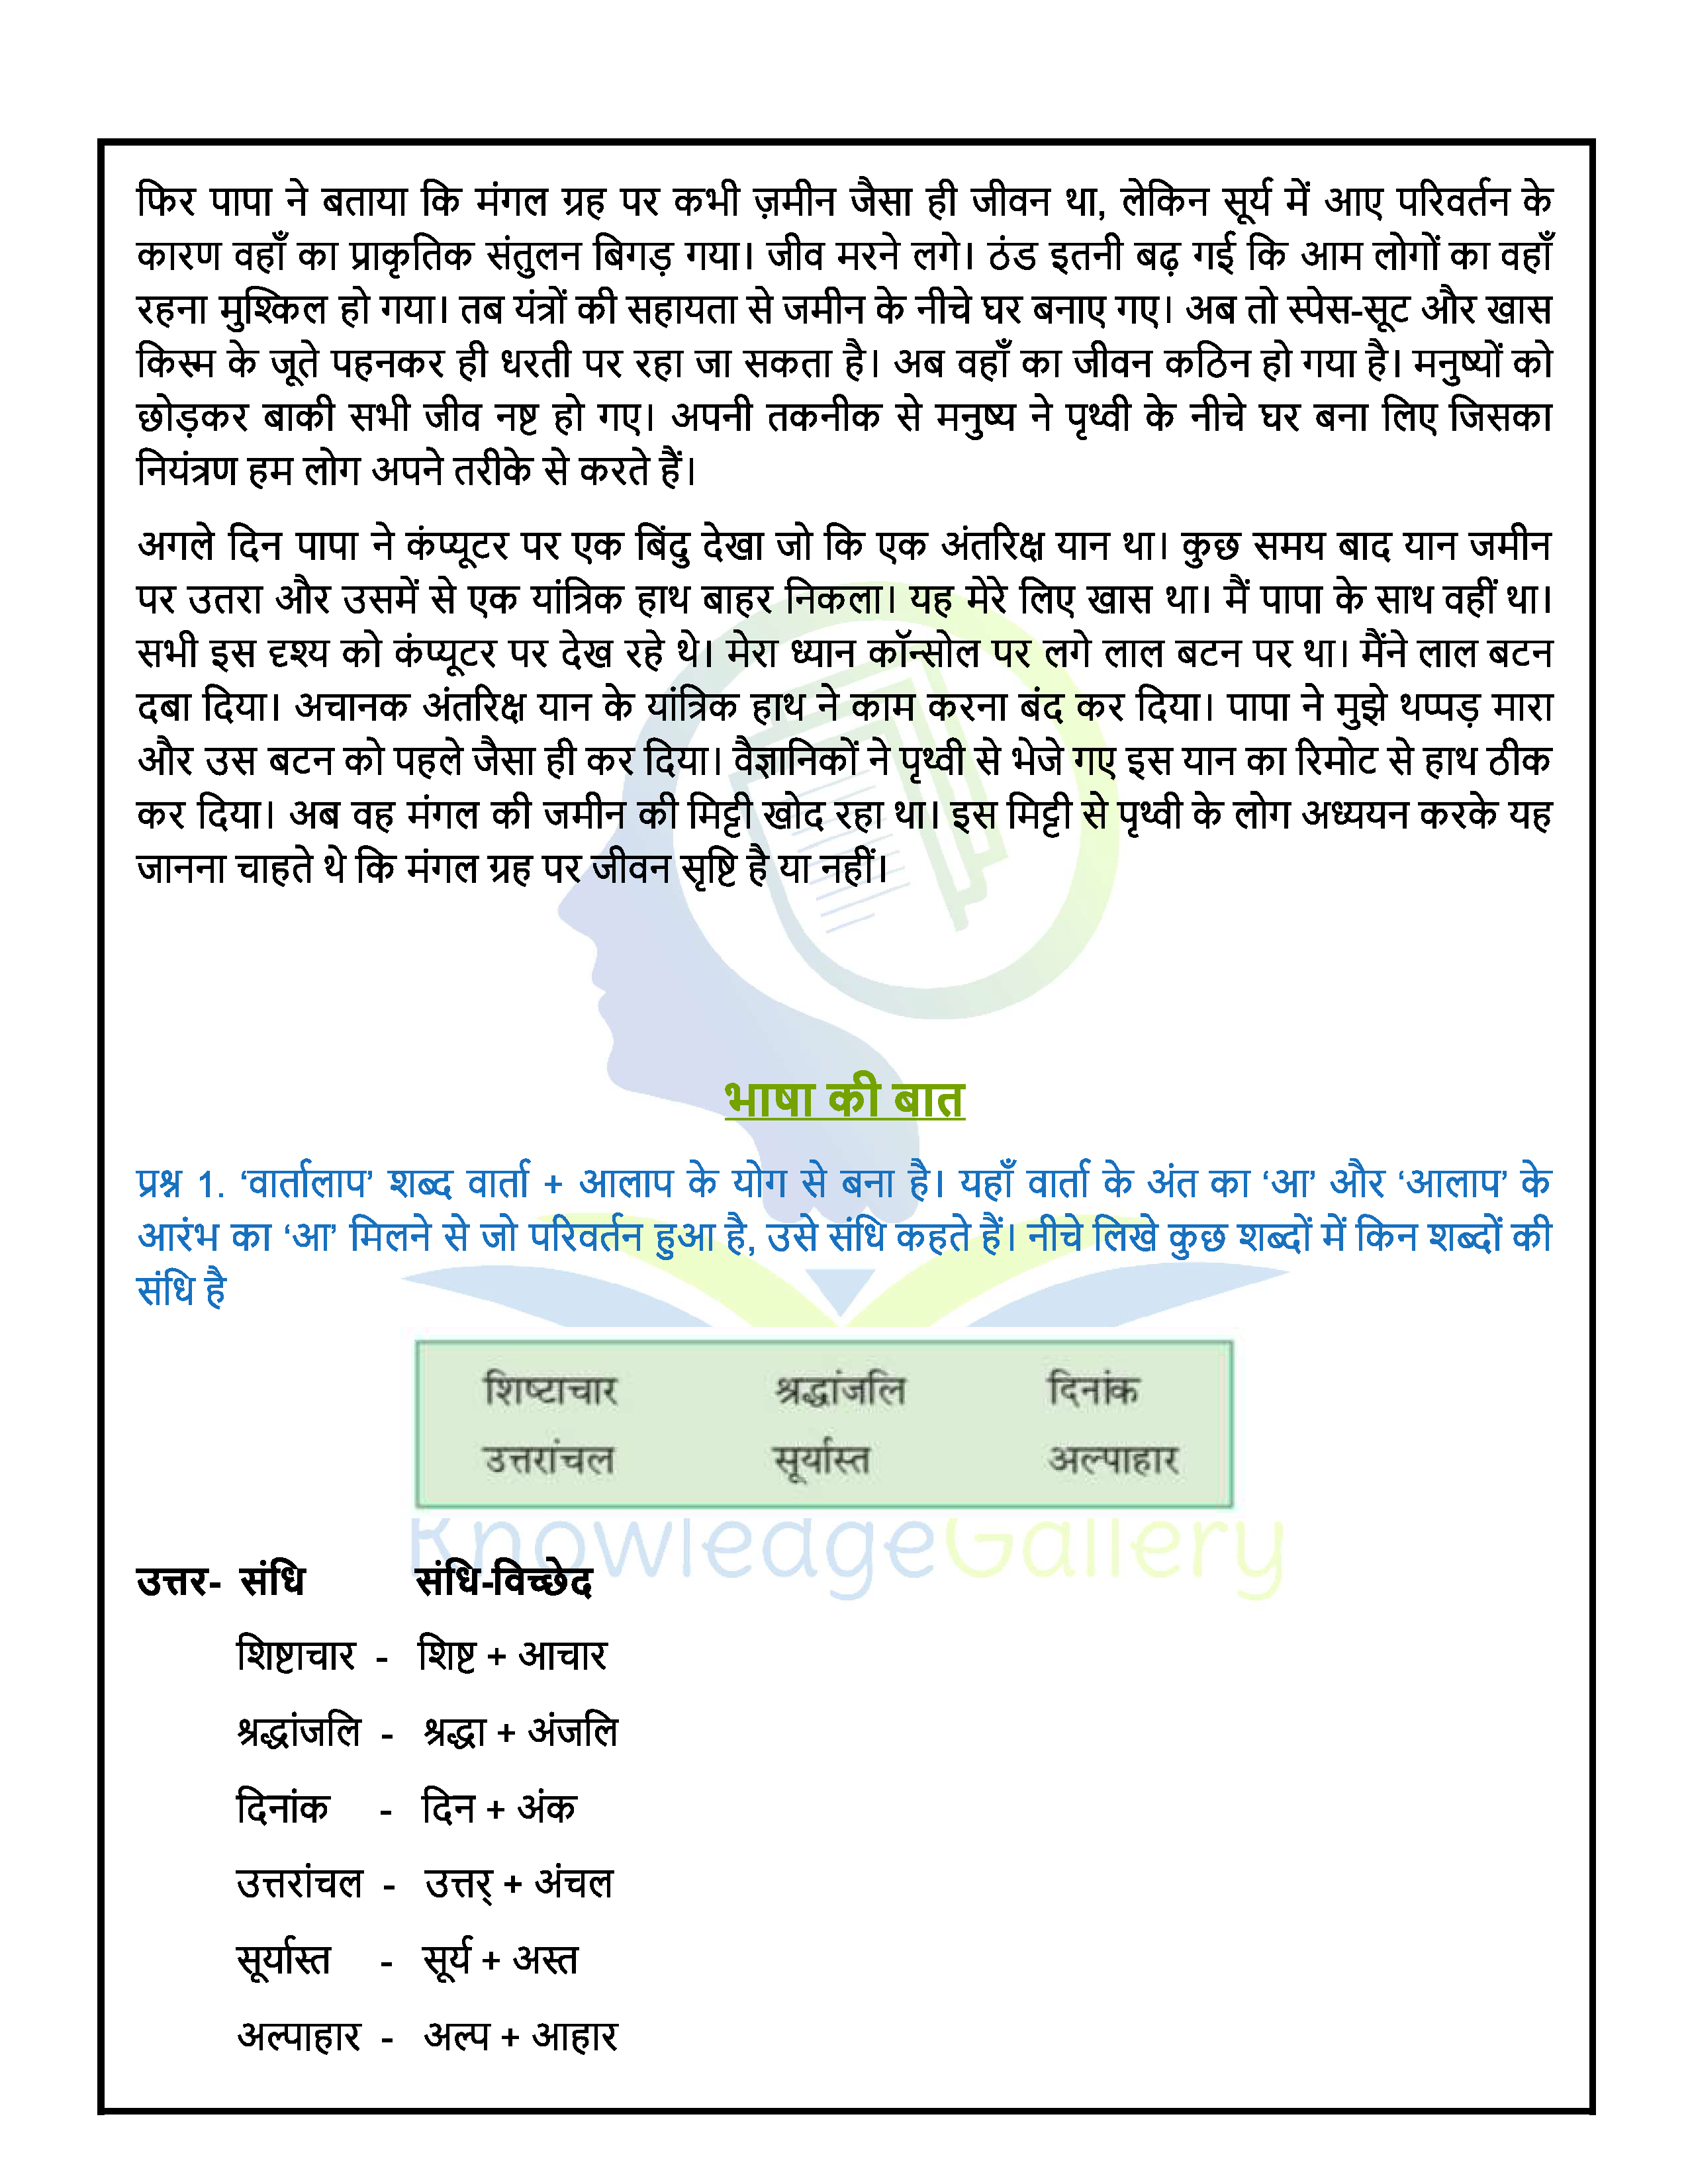 NCERT Solution For Class 6 Hindi Chapter 6 part 4